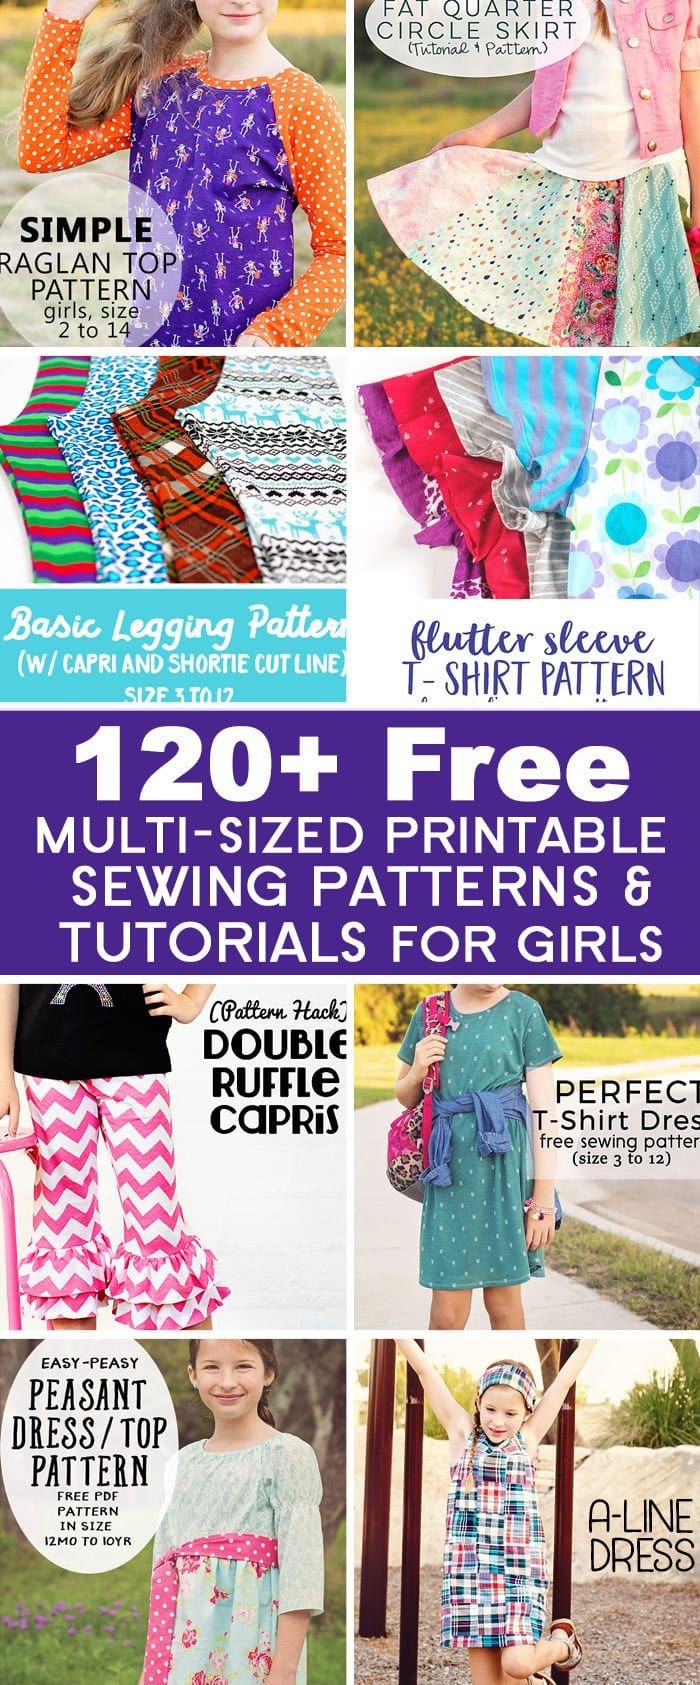 Over 120 Free Printable Sewing Patterns And Tutorials For Girls - Free Printable Sewing Patterns For Kids